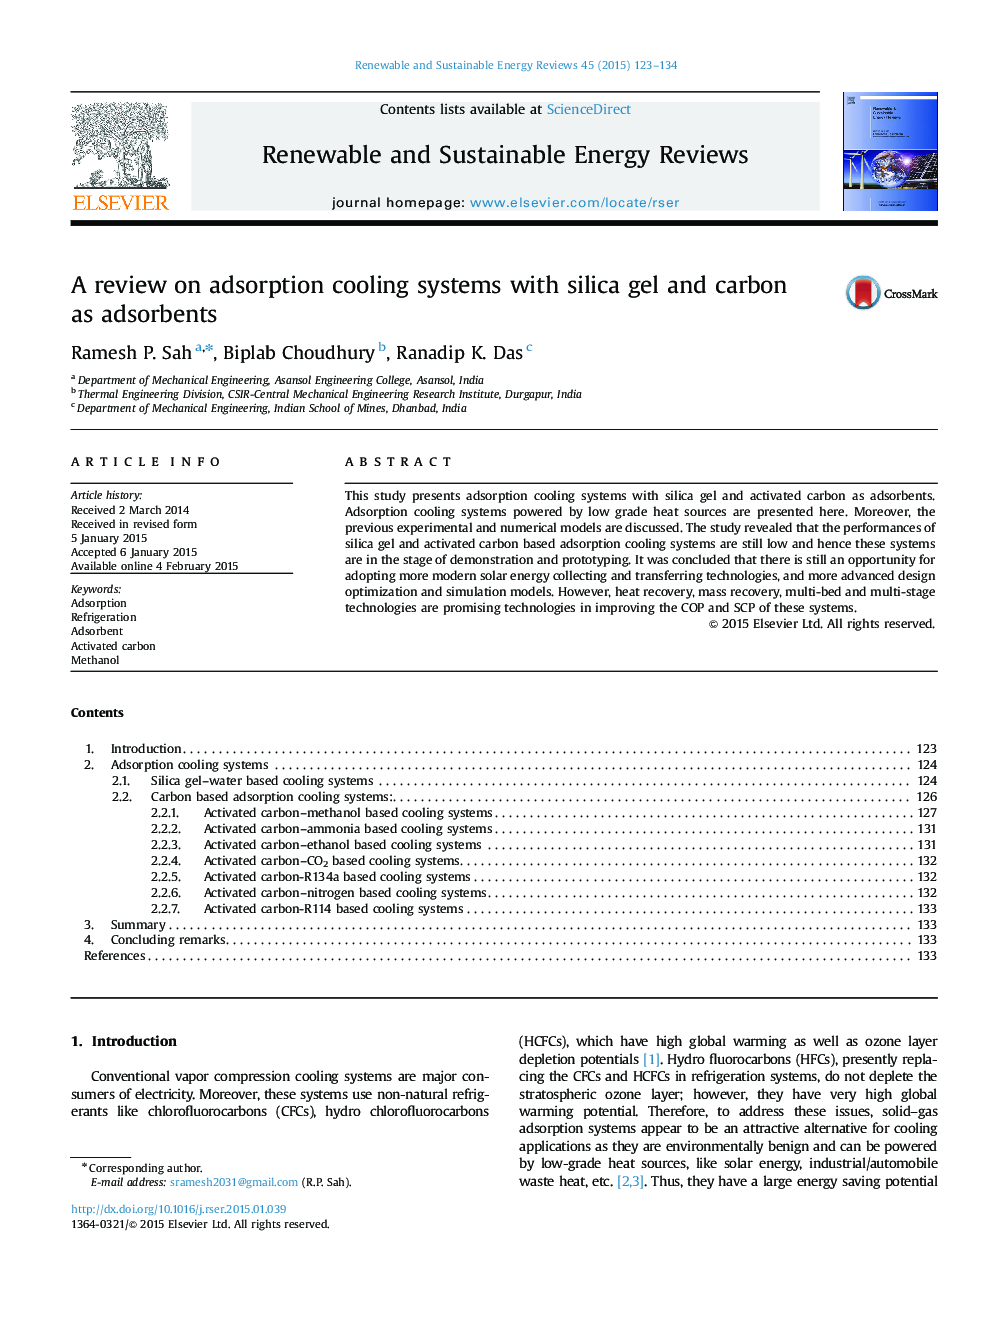 A review on adsorption cooling systems with silica gel and carbon as adsorbents